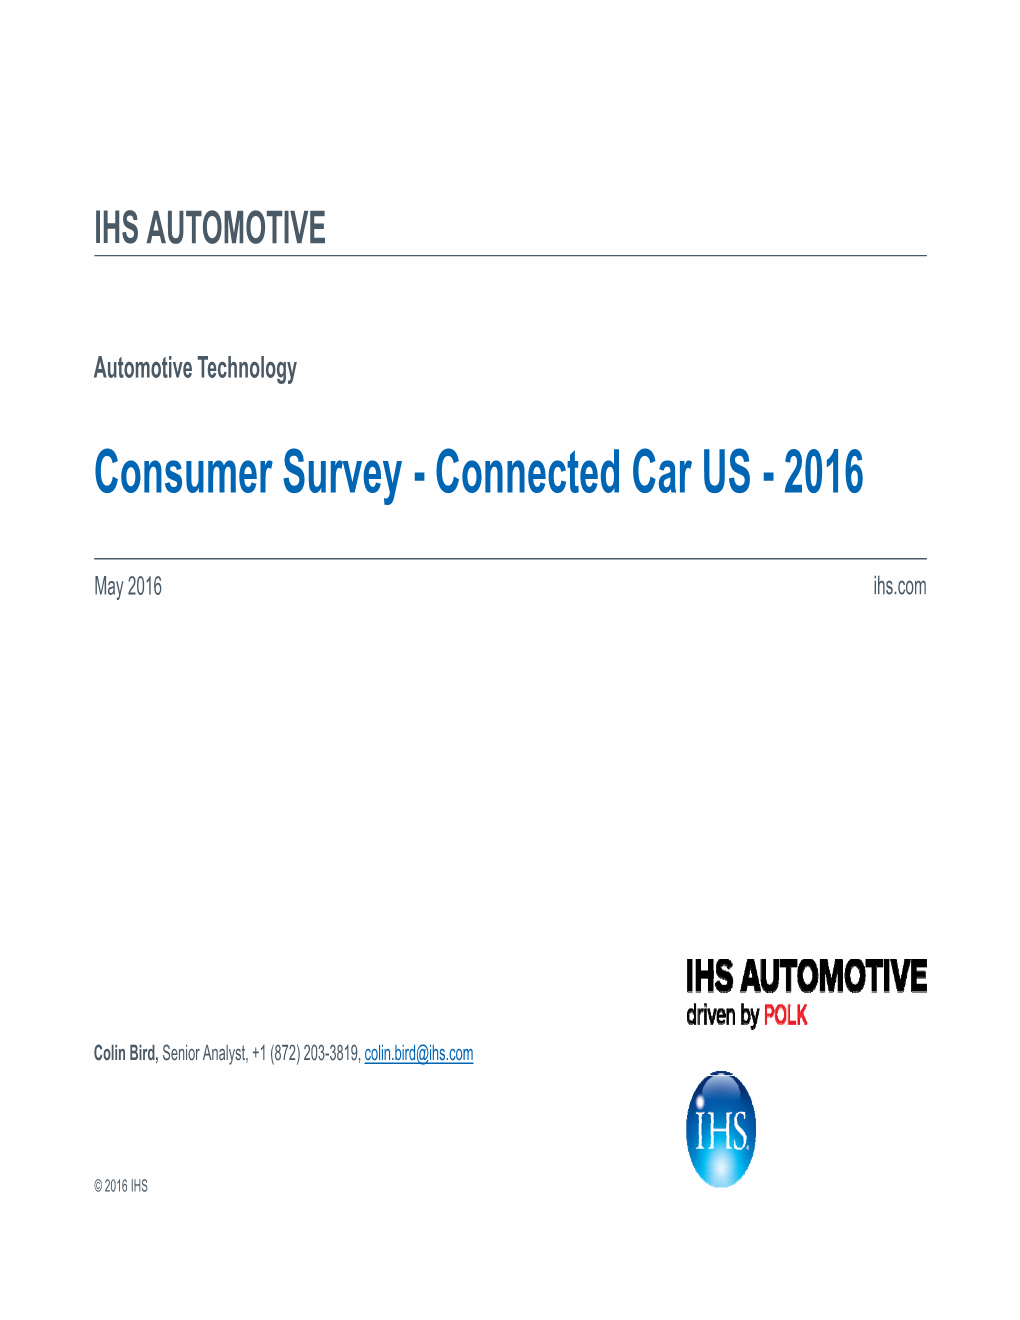 Consumer Survey - Connected Car US - 2016